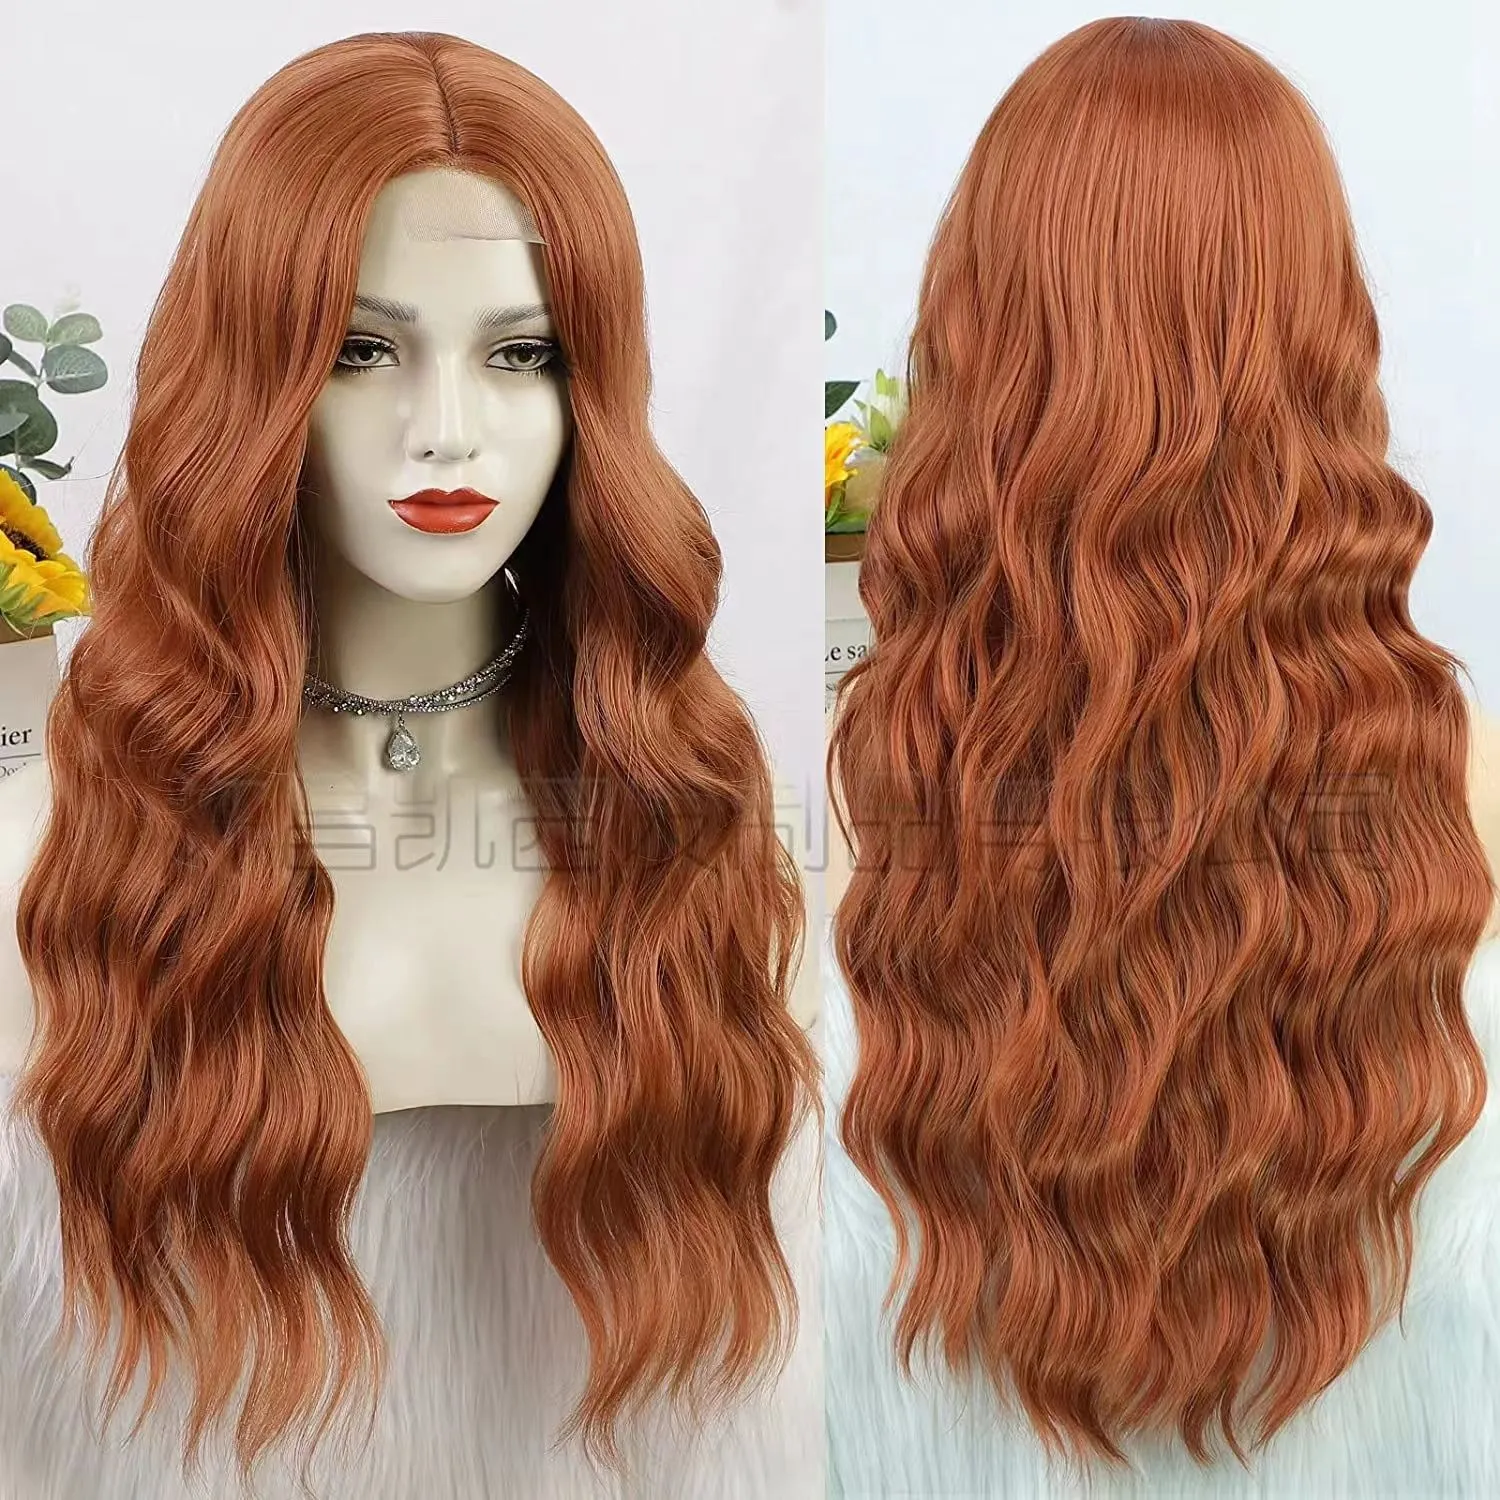 Wigs Loose Deep Wave Brazilian Human Hair Wigs 32 34 Inch Transparent Synthetic Curly Lace Front Wig For Black Women